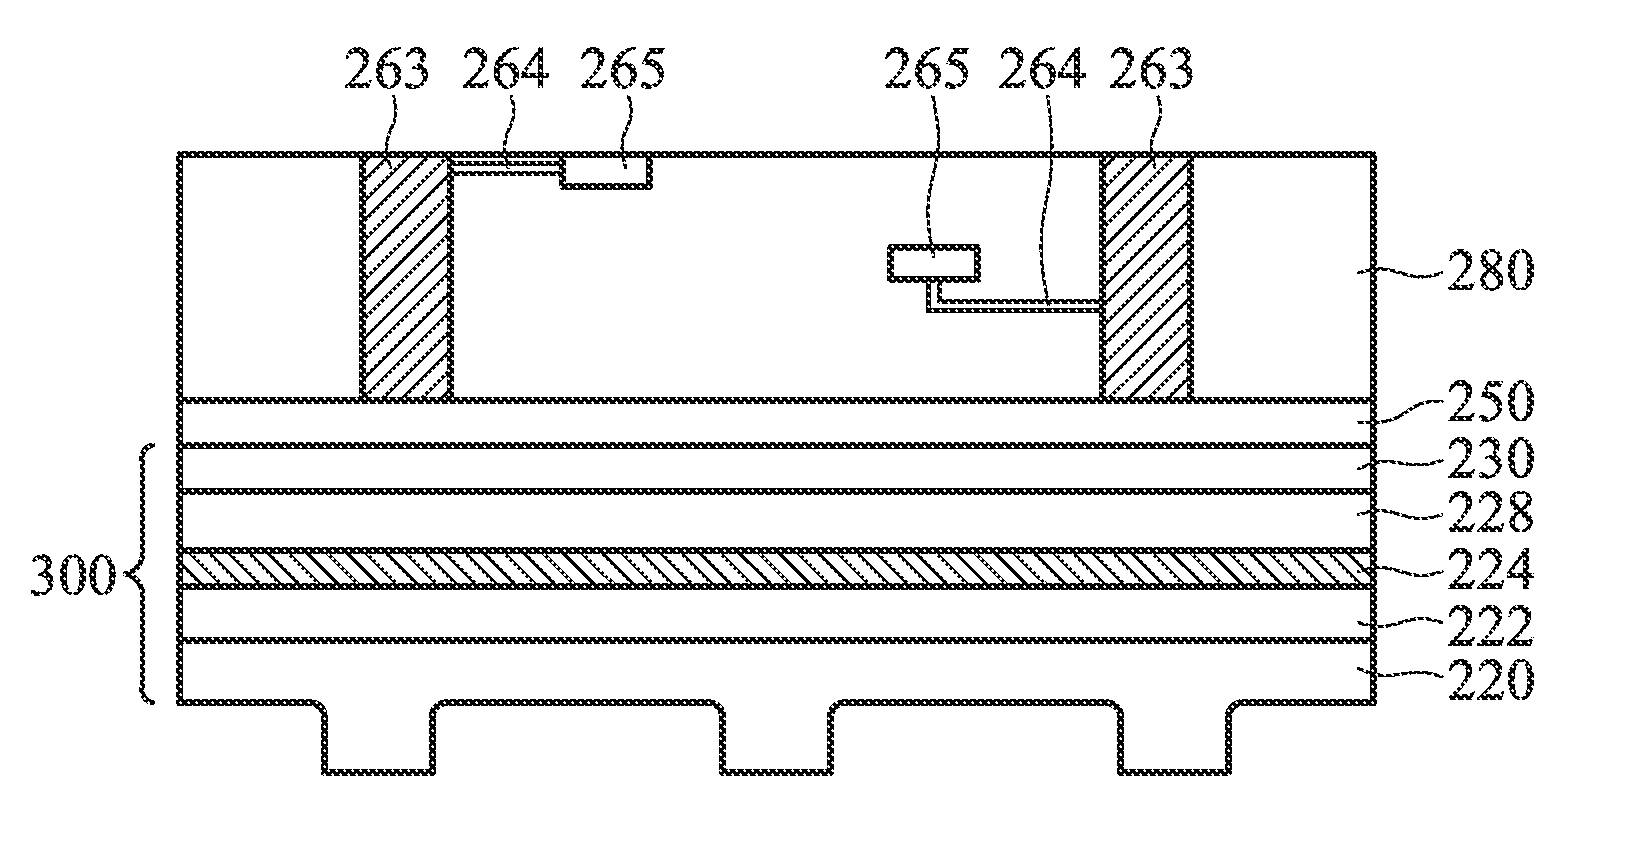 Method of Separating Light-Emitting Diode from a Growth Substrate